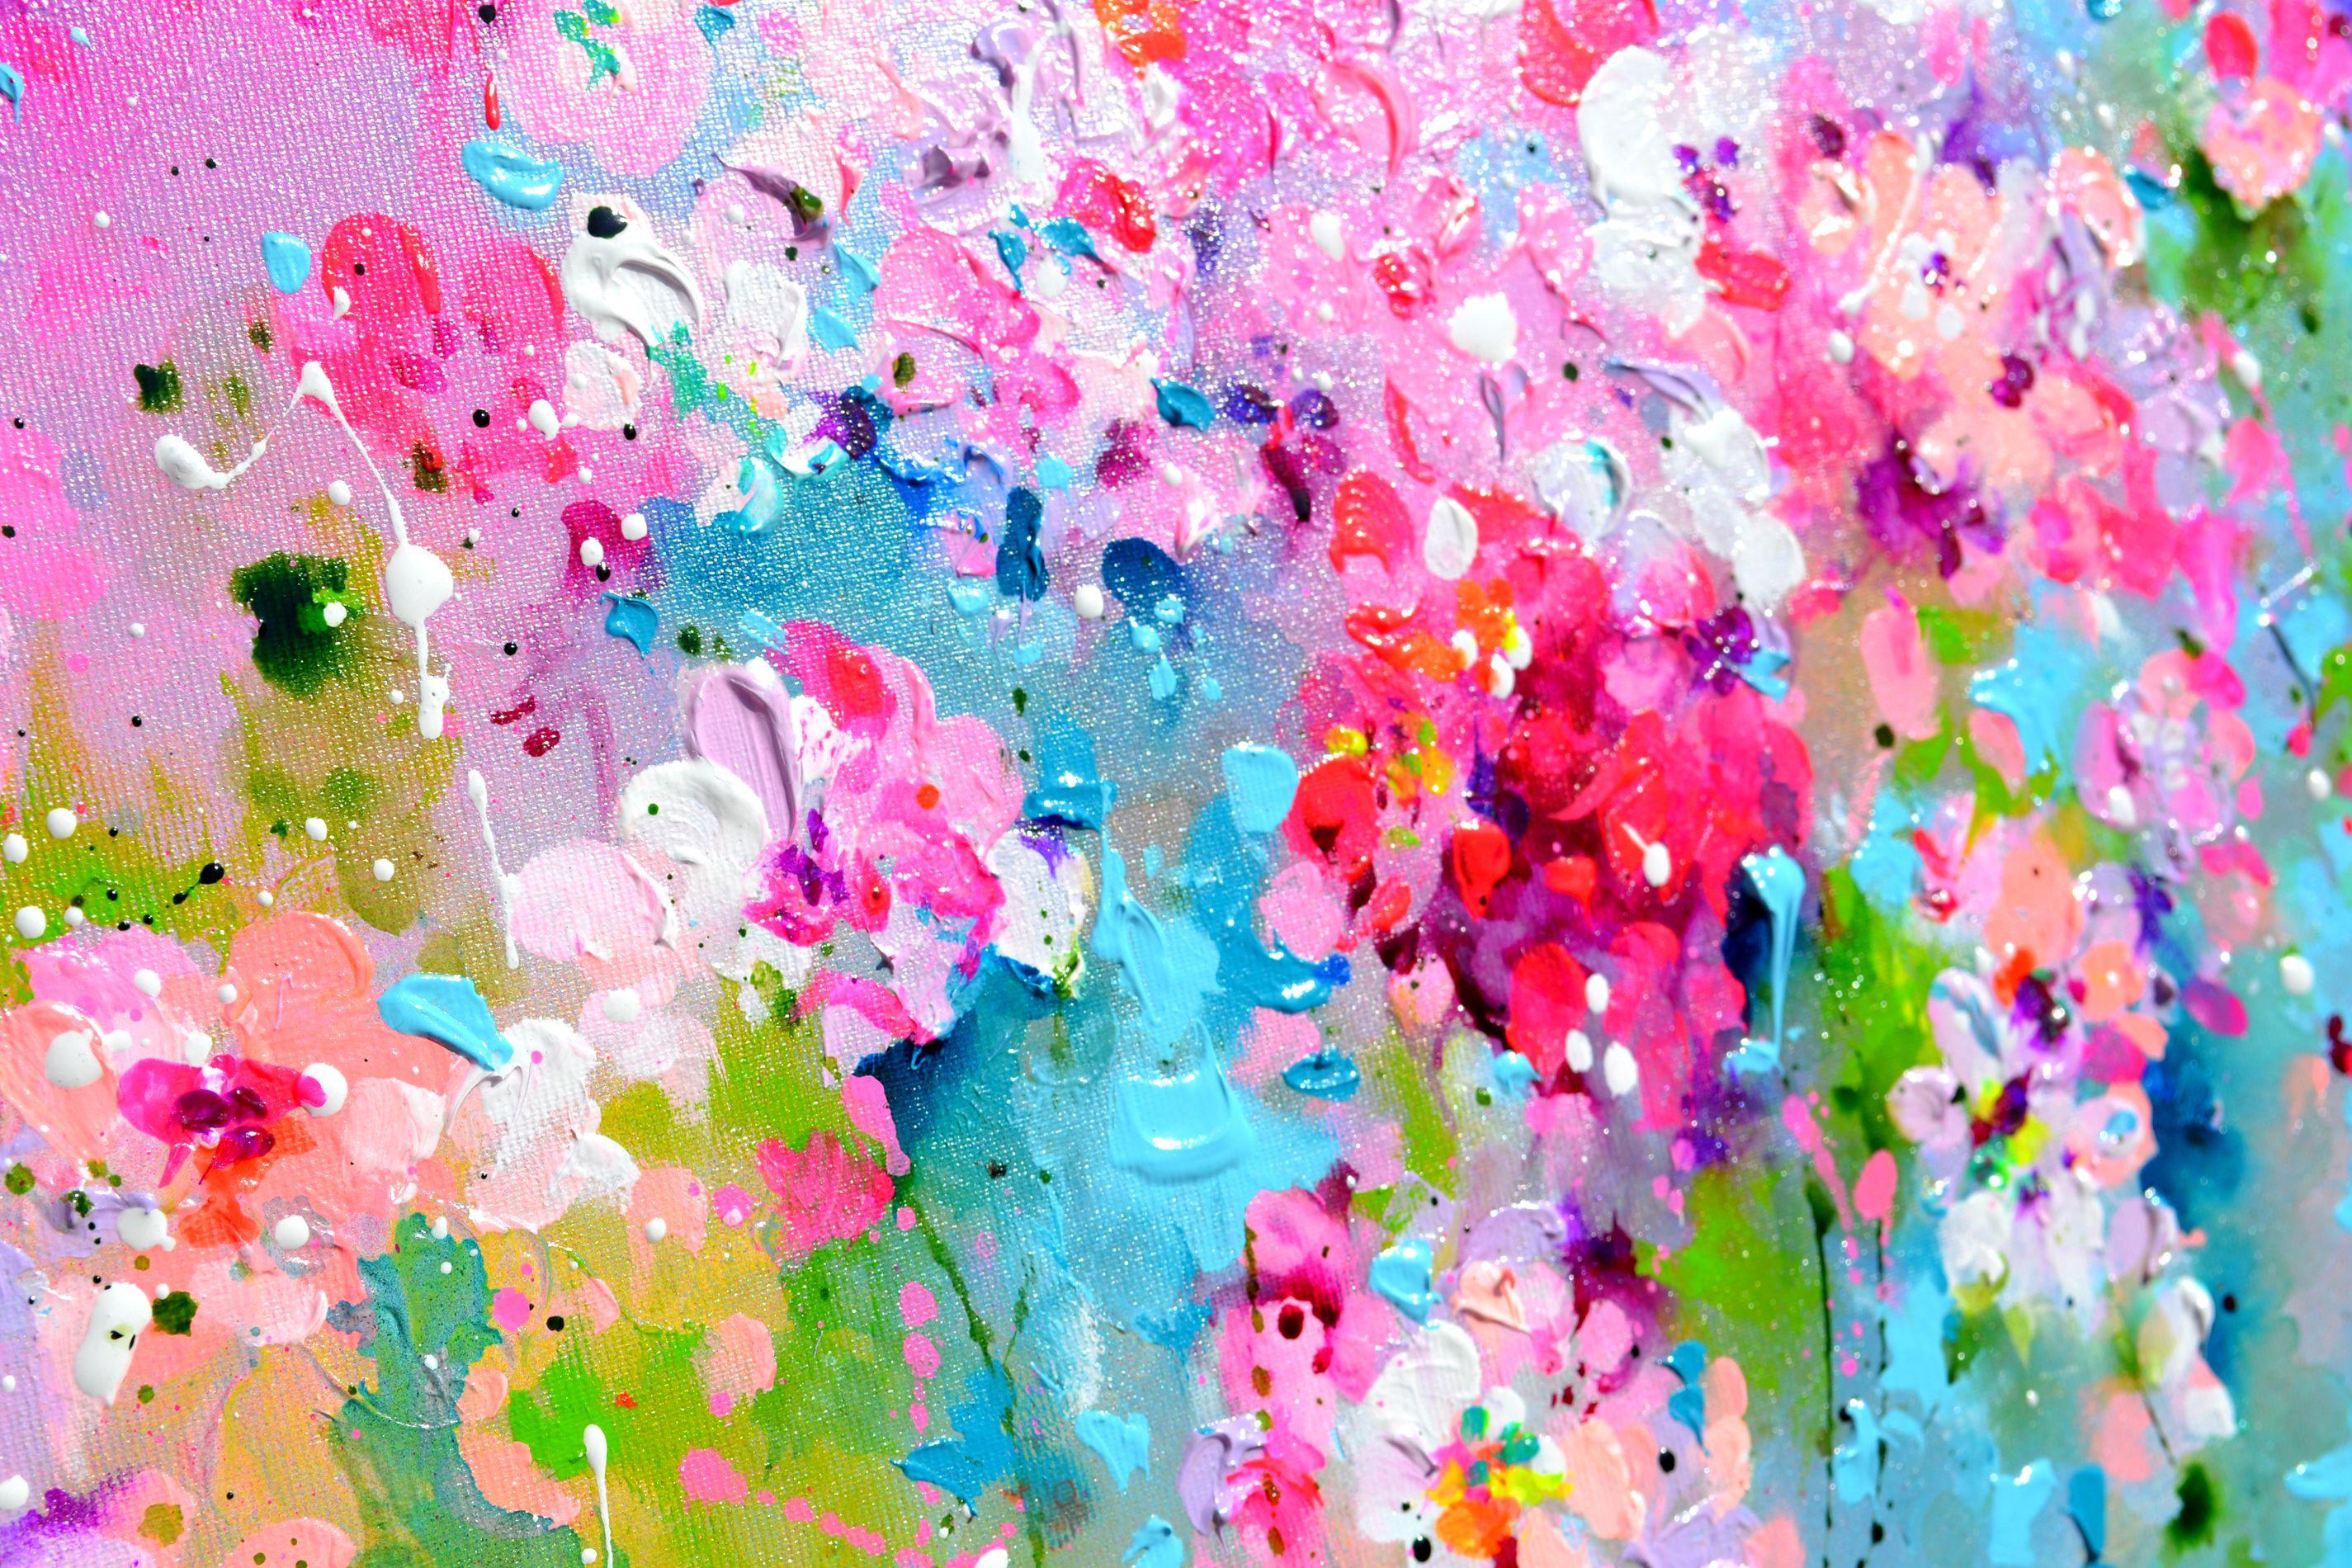 I've Dreamed 28 Sakura Pink Cherry Tree Colorful, Painting, Acrylic on Canvas 2